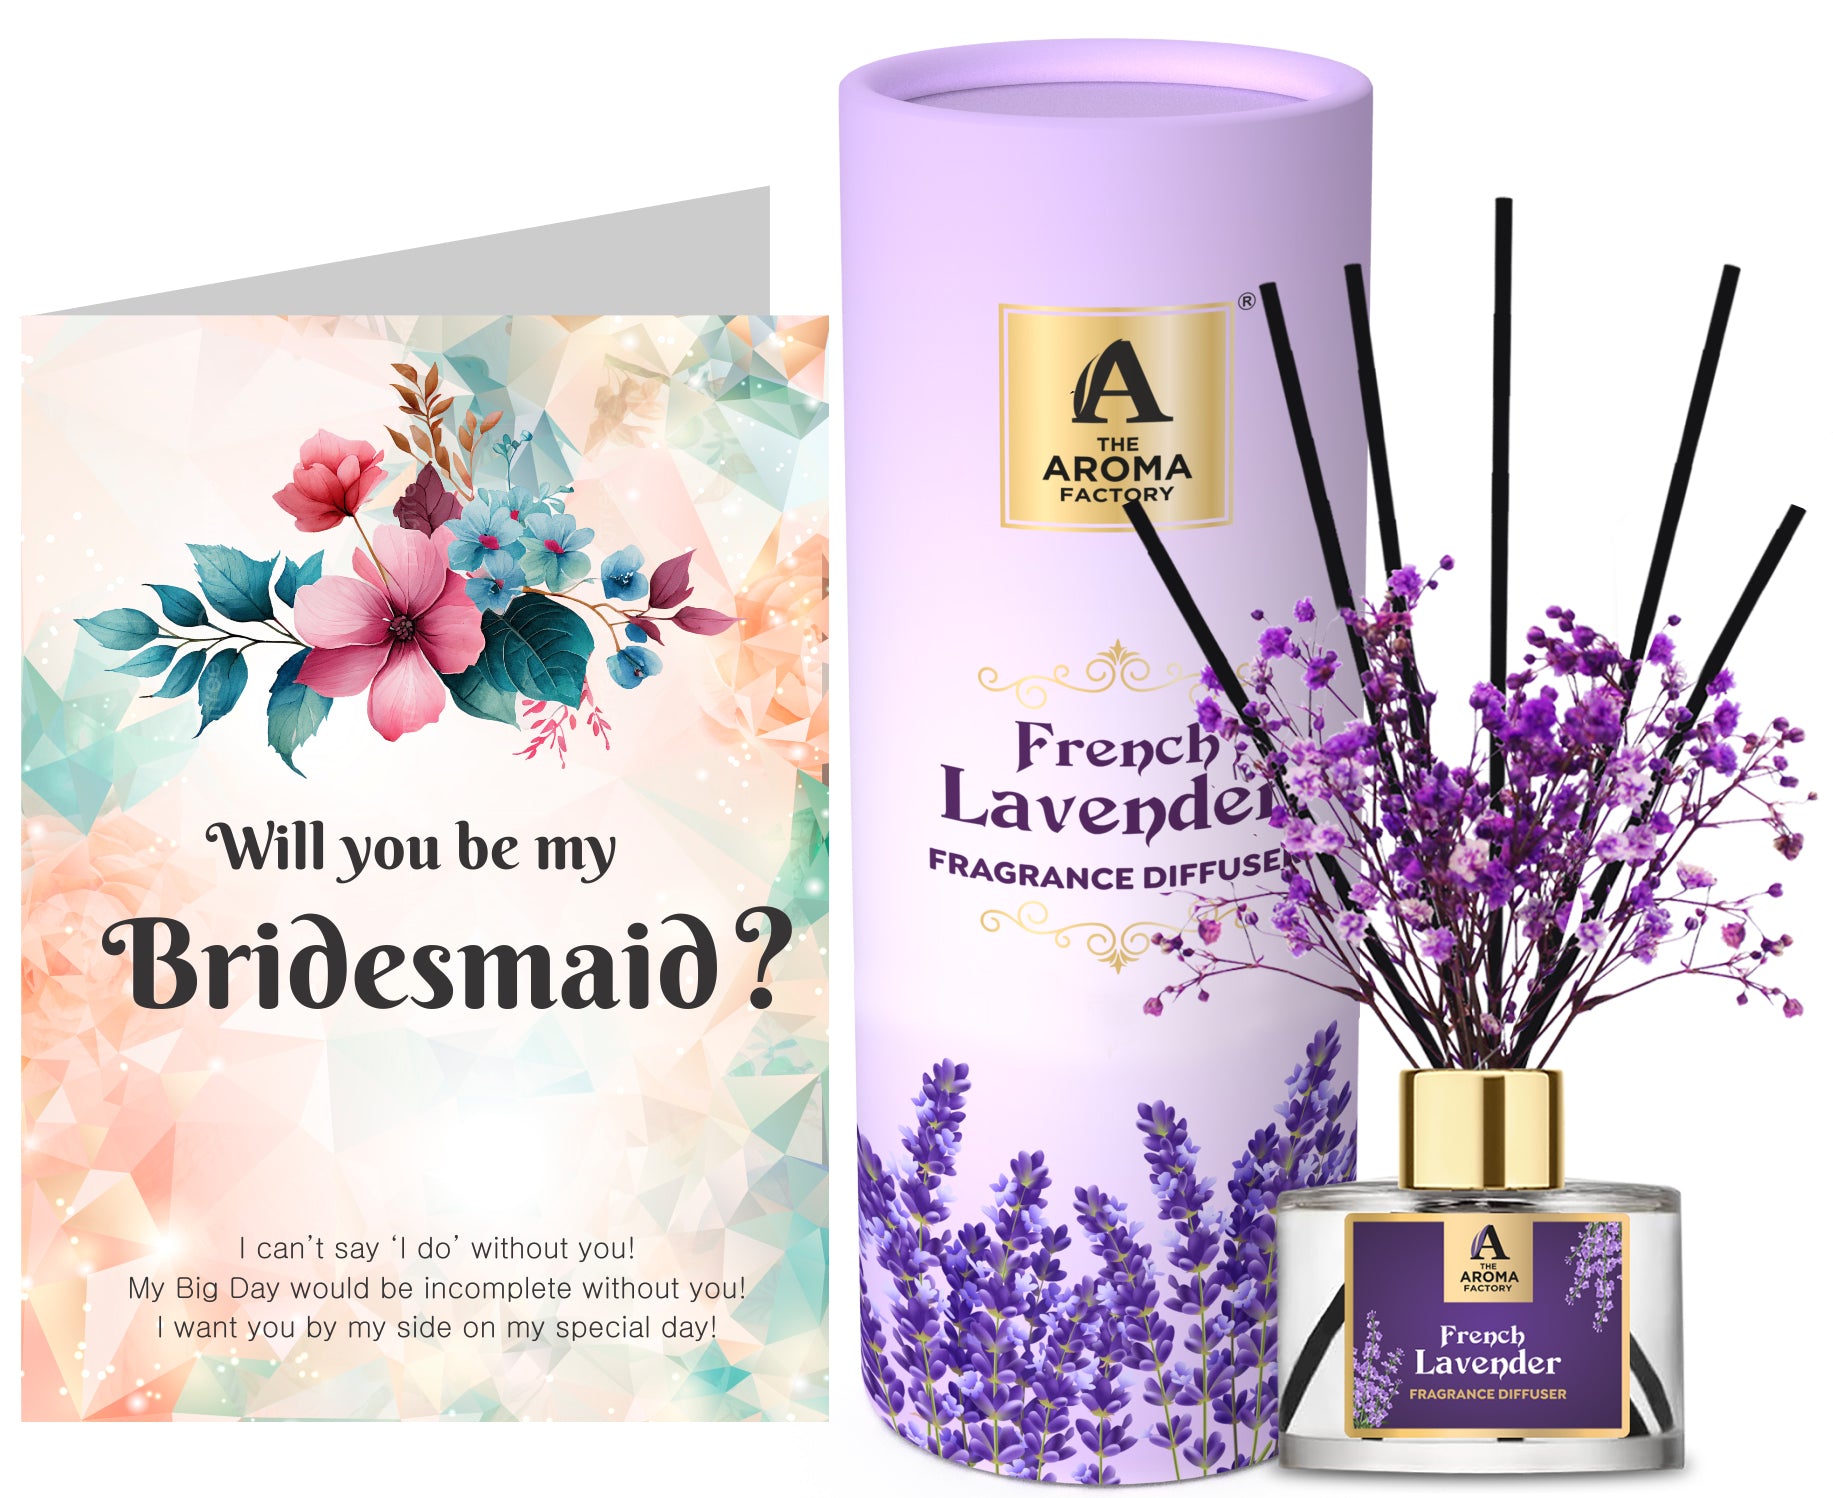 The Aroma Factory Bridesmaid Hamper Gift for pre Wedding with Card, French Lavender Fragrance Reed Diffuser Set (1 Box + 1 Card)